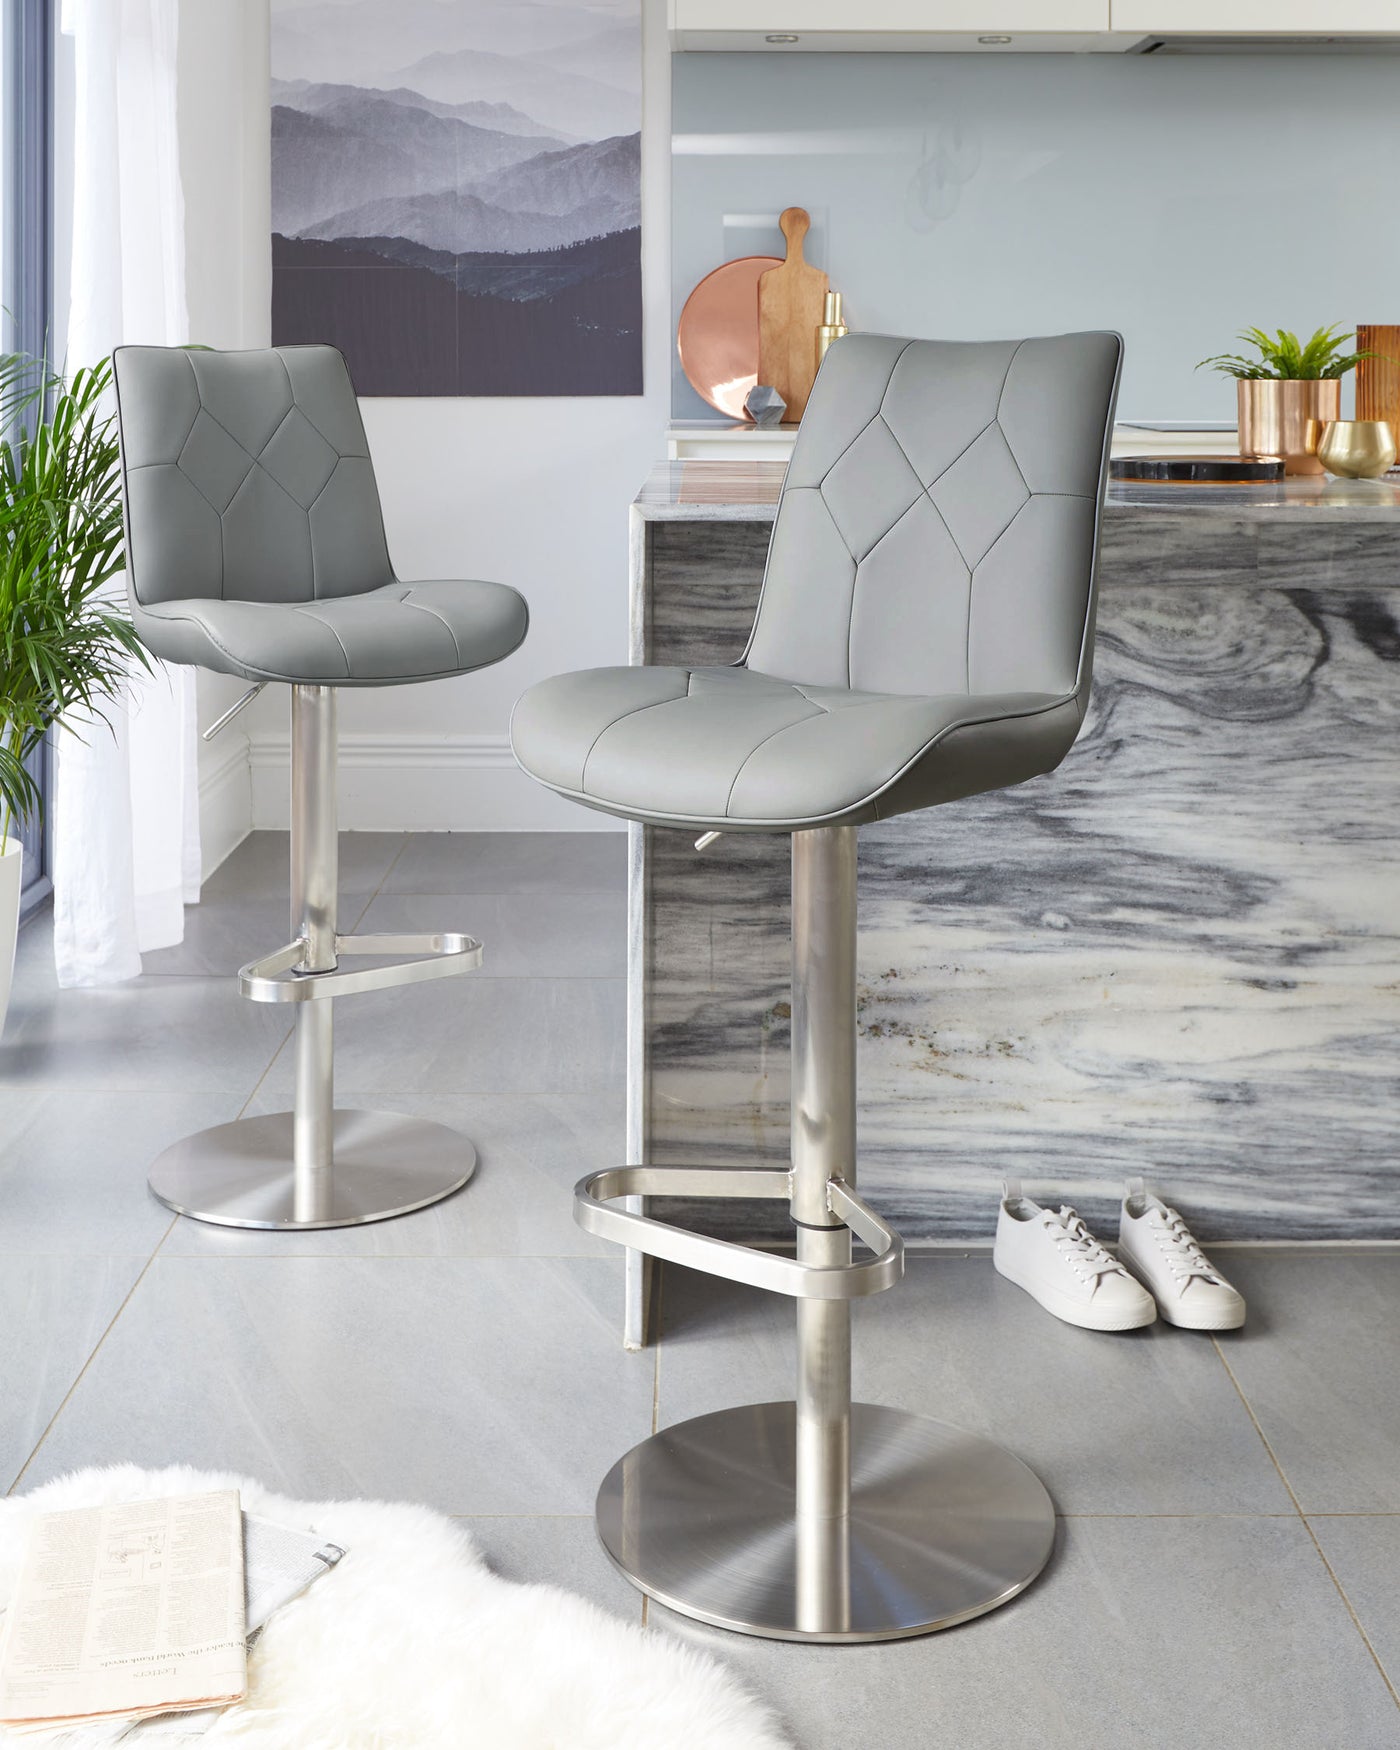 Two modern grey bar stools with quilted leather upholstery and stainless steel pedestal bases with integrated footrests.